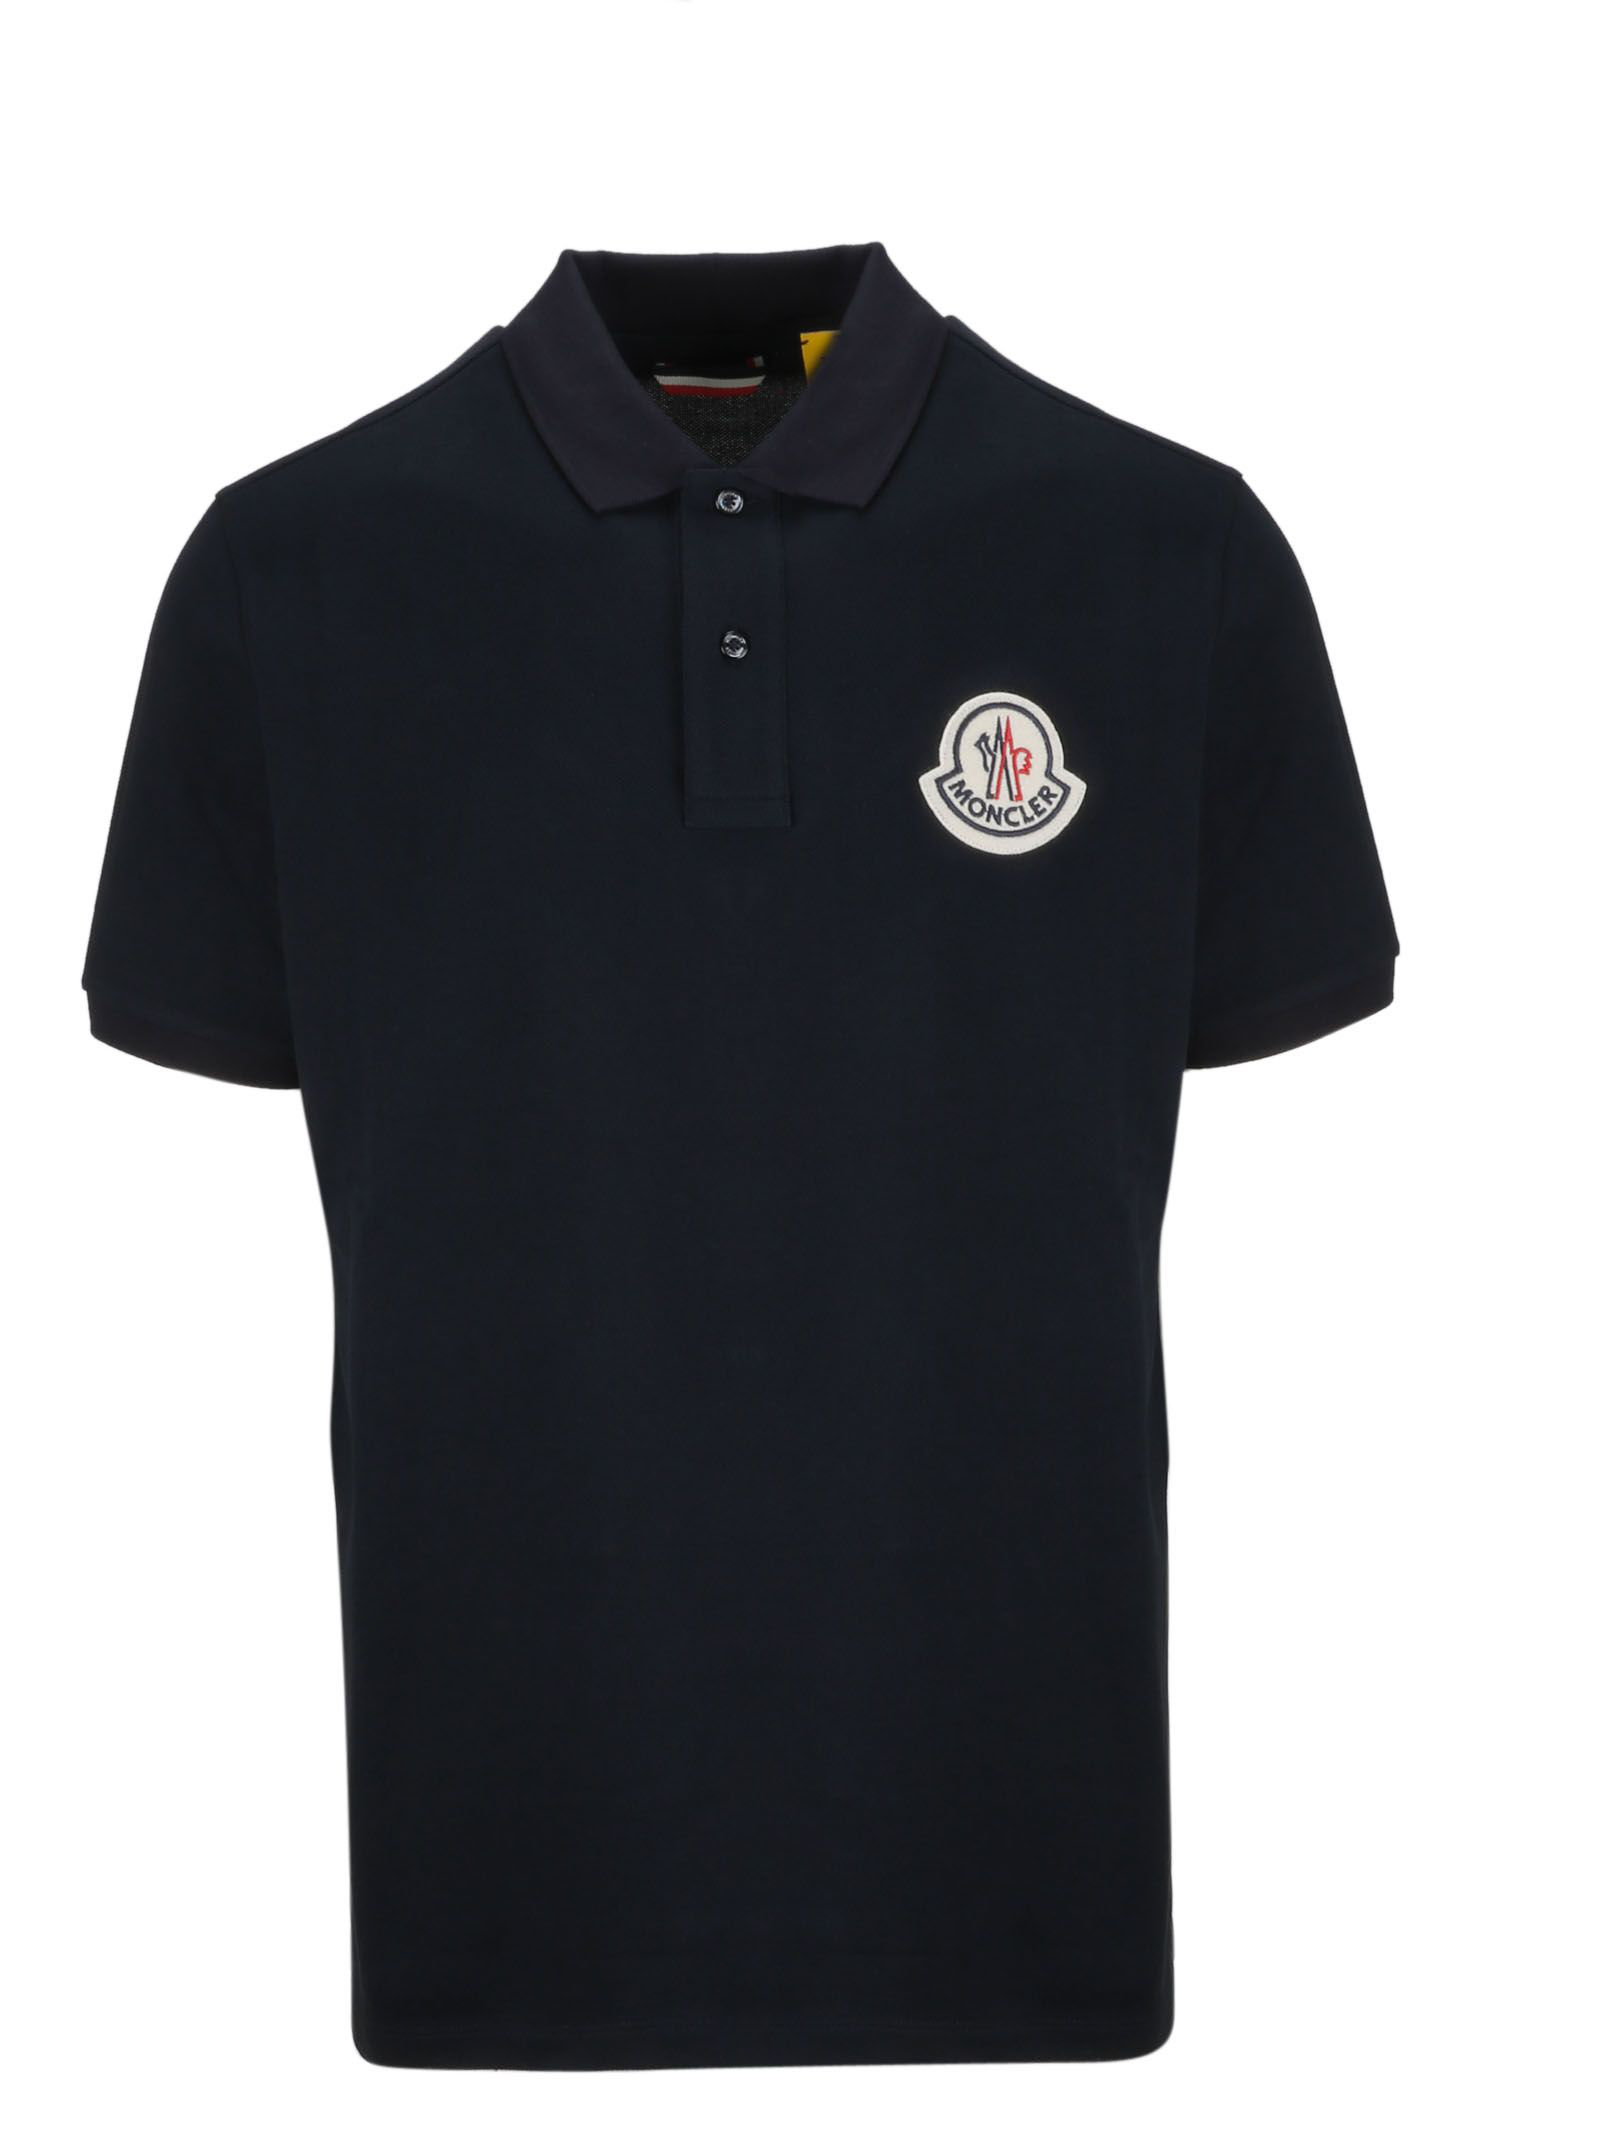 Moncler Genius Logo Patched Polo Shirt In 773 | ModeSens